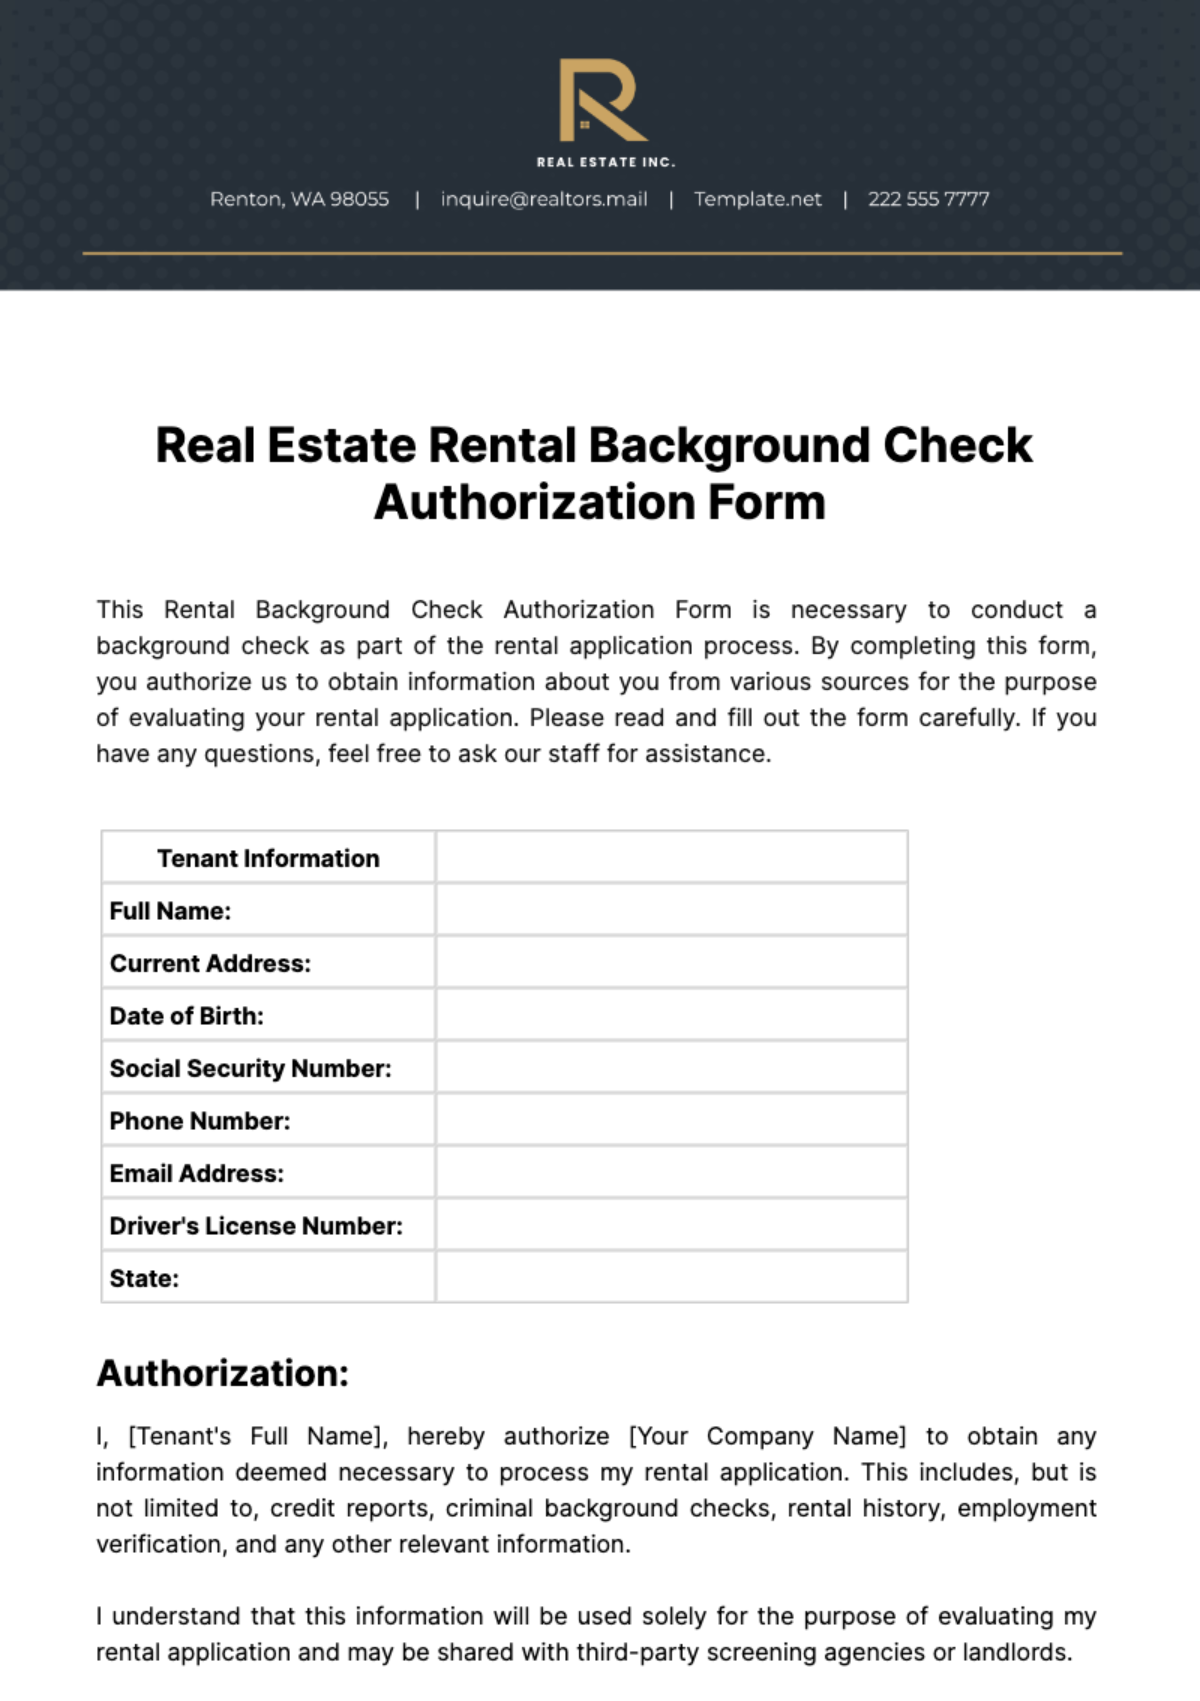 Free Real Estate Rental Background Check Authorization Form Template